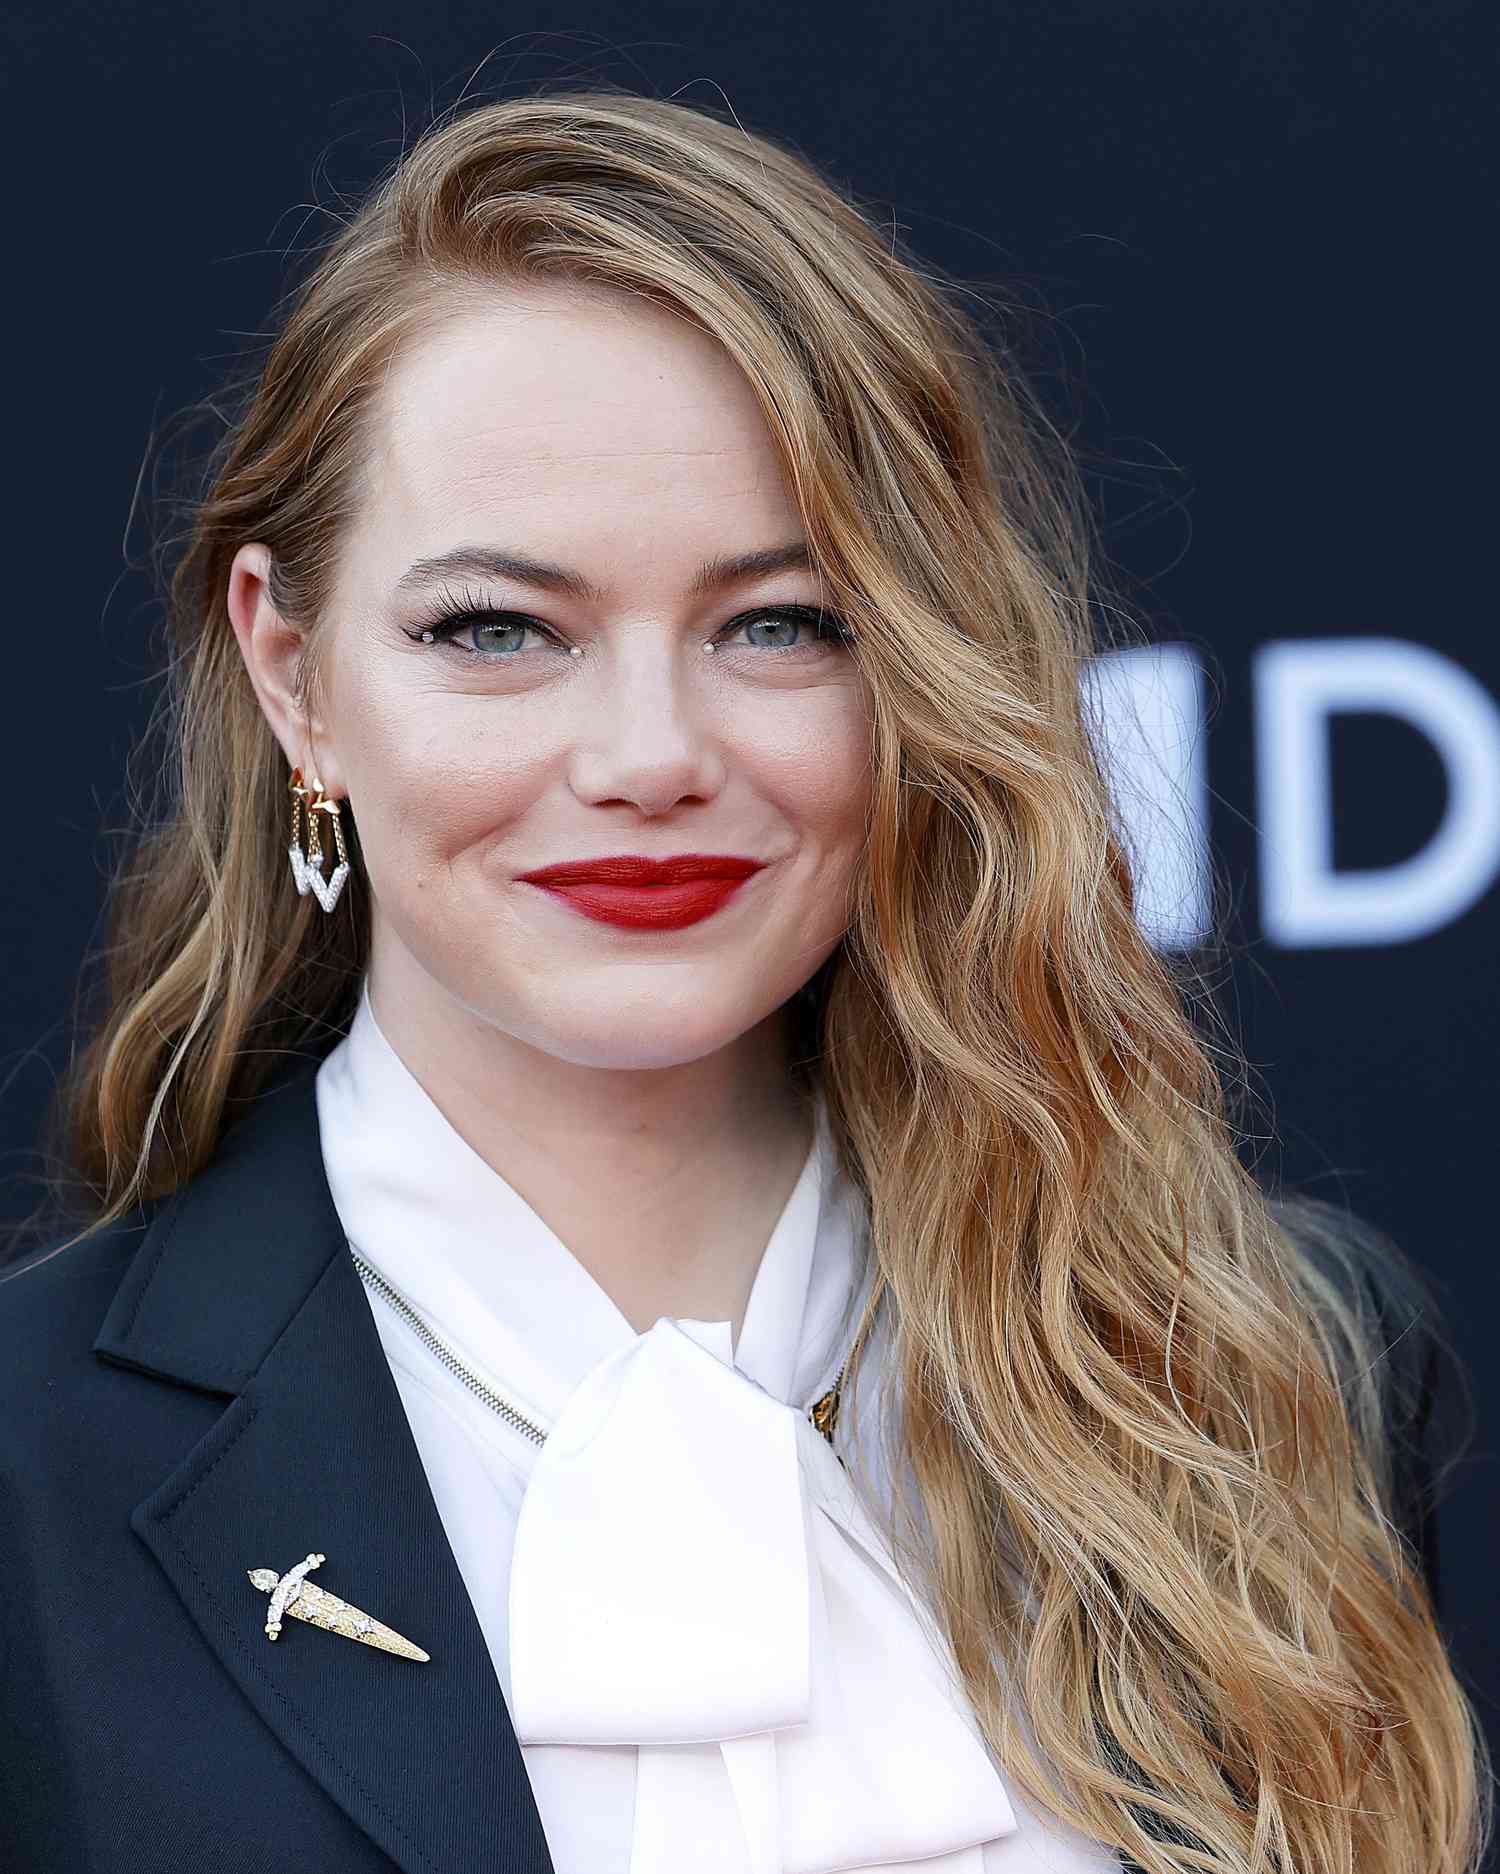 Emma Stone with wavy, side-parted, strawberry blonde hair